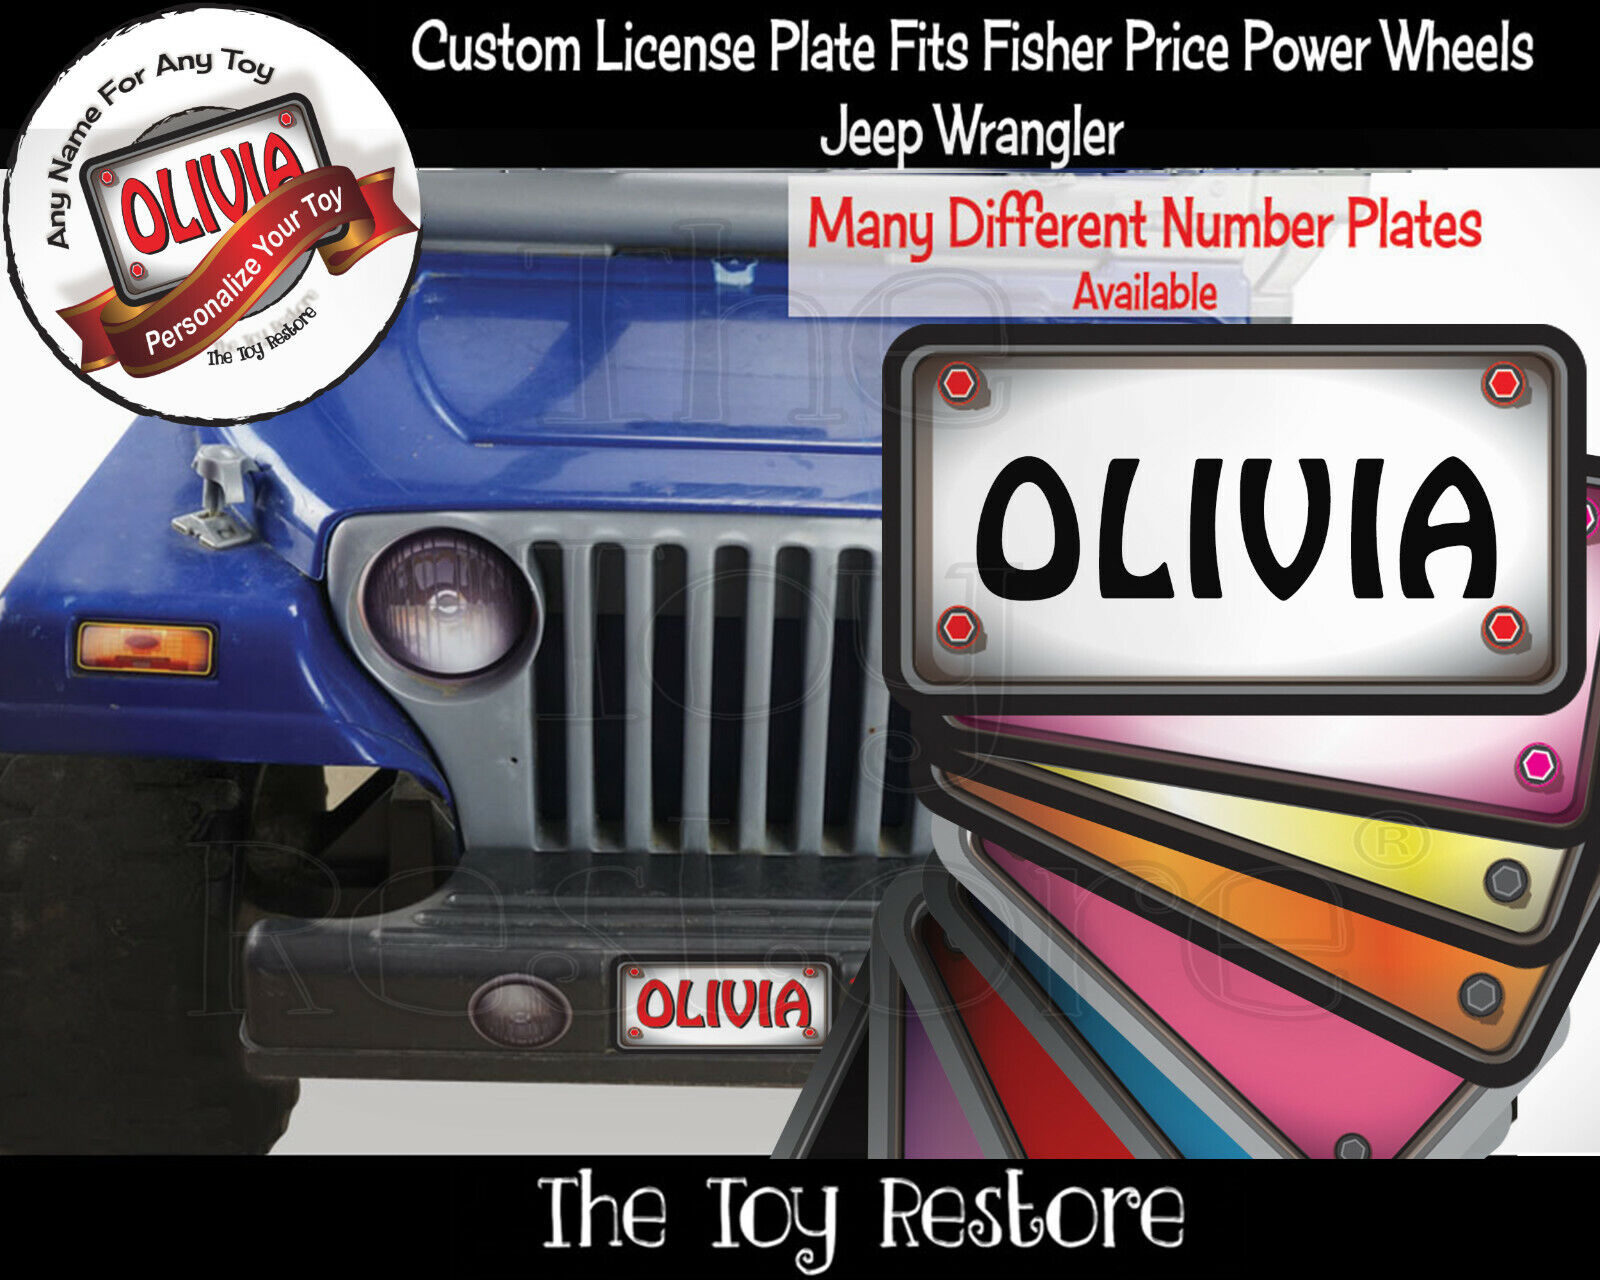 Personalized License Plate Decal Sticker Fits Fisher Price Power Wheels Jeep